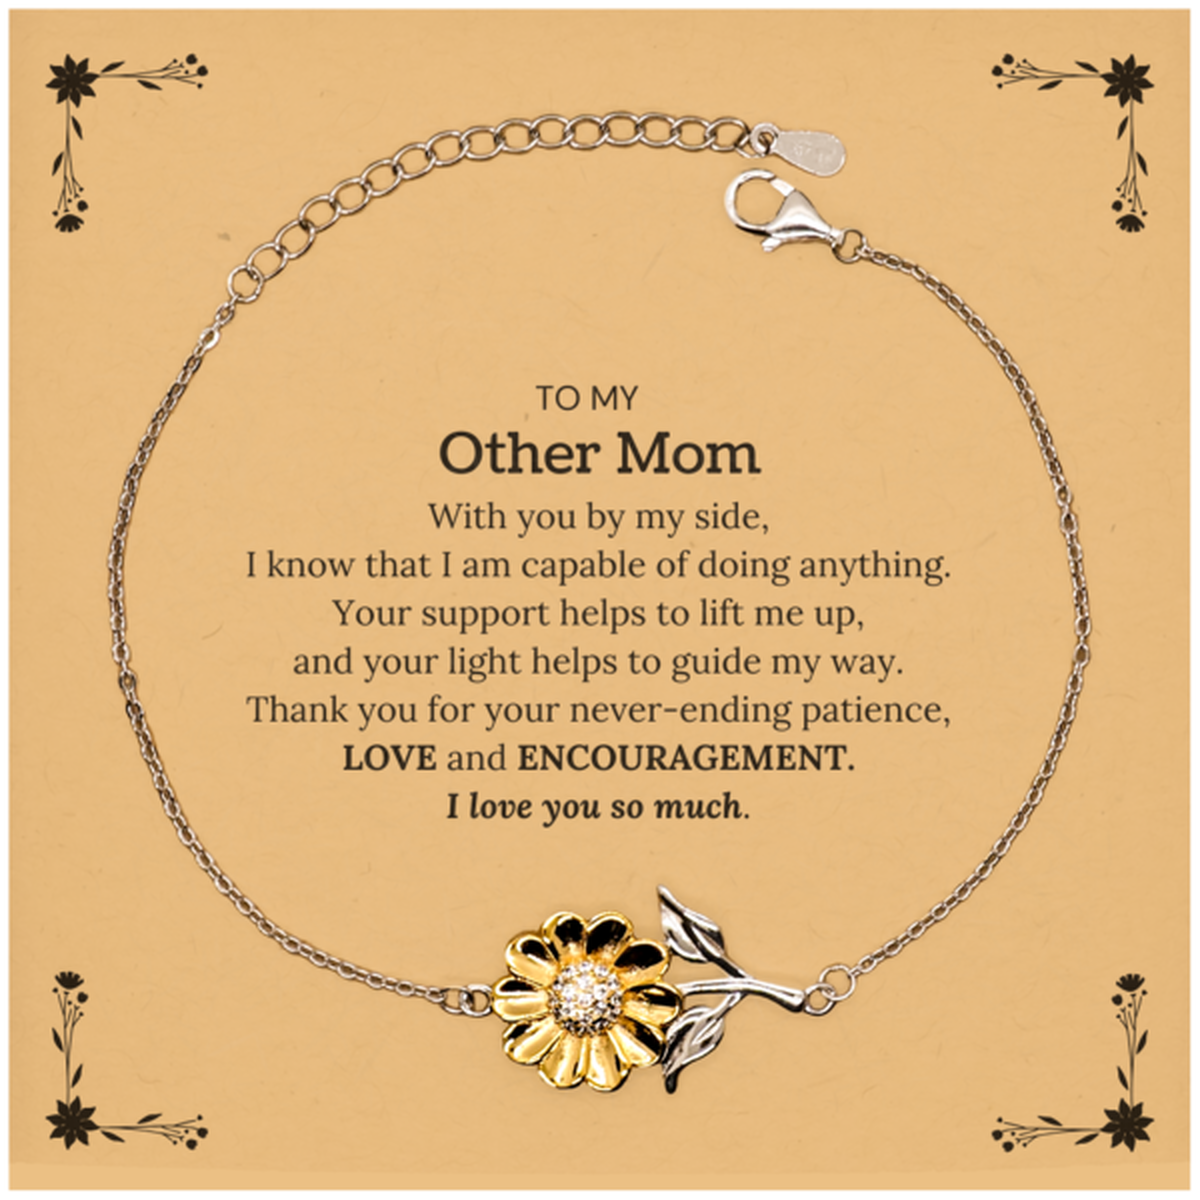 Appreciation Other Mom Sunflower Bracelet Gifts, To My Other Mom Birthday Christmas Wedding Keepsake Gifts for Other Mom With you by my side, I know that I am capable of doing anything. I love you so much